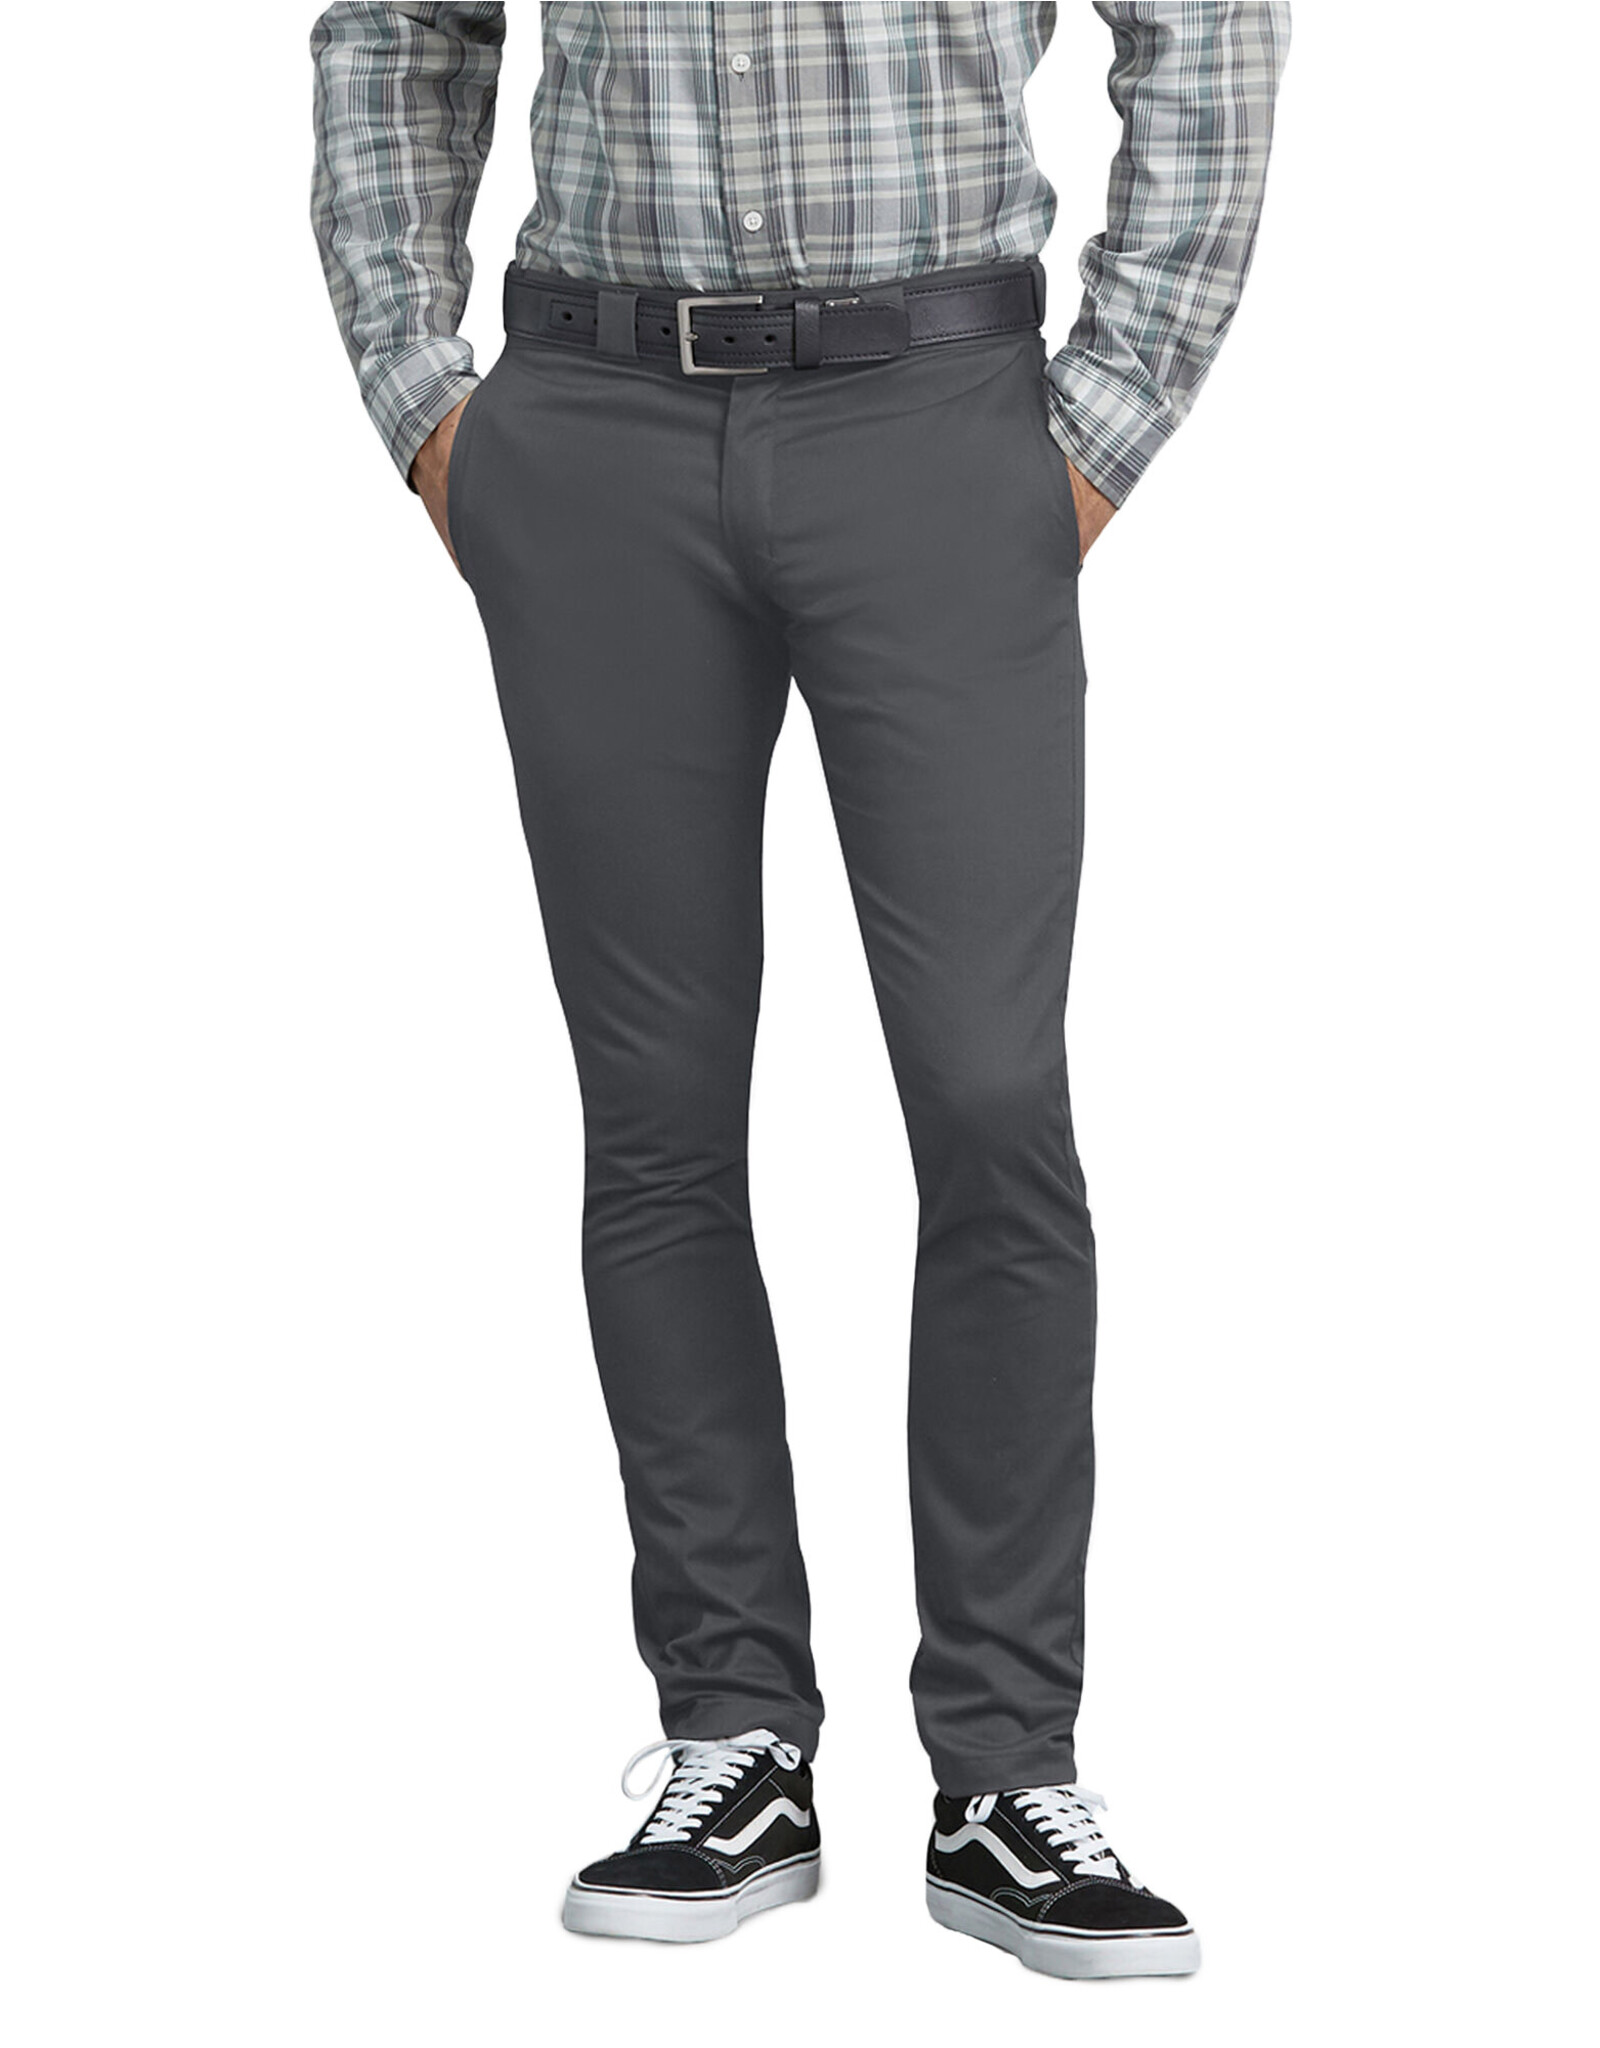 DICKIES Skinny Fit Work Pants Charcoal Gray - WP801CH